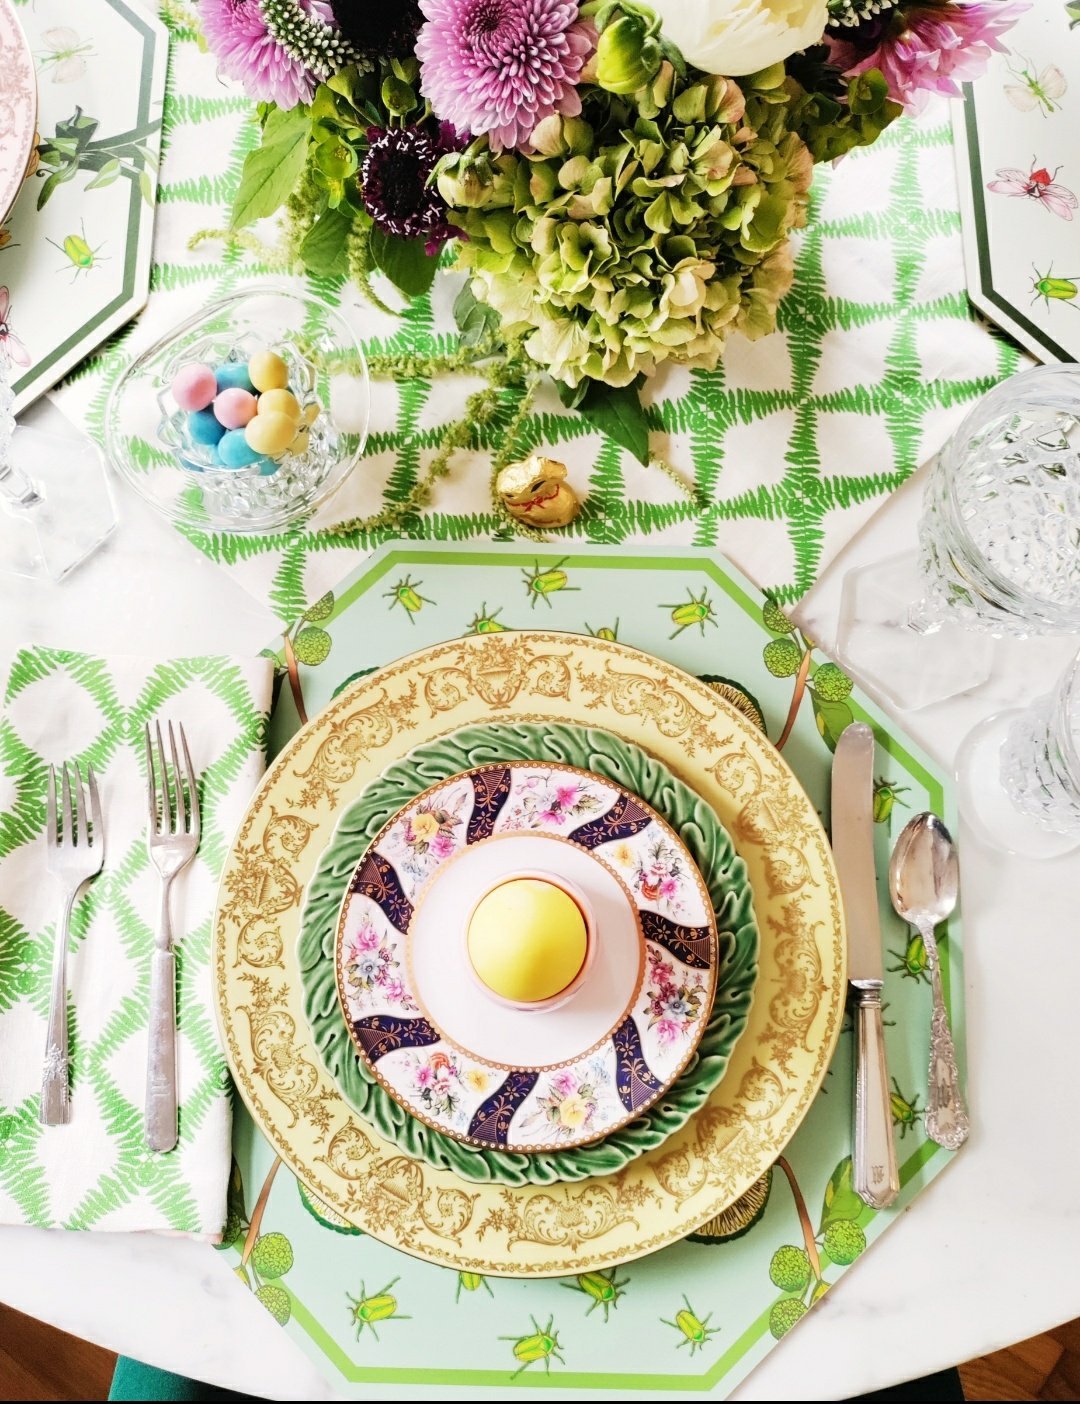 Jump into Spring Entertaining with 5 Tips and Tabletop Design Trends 2021